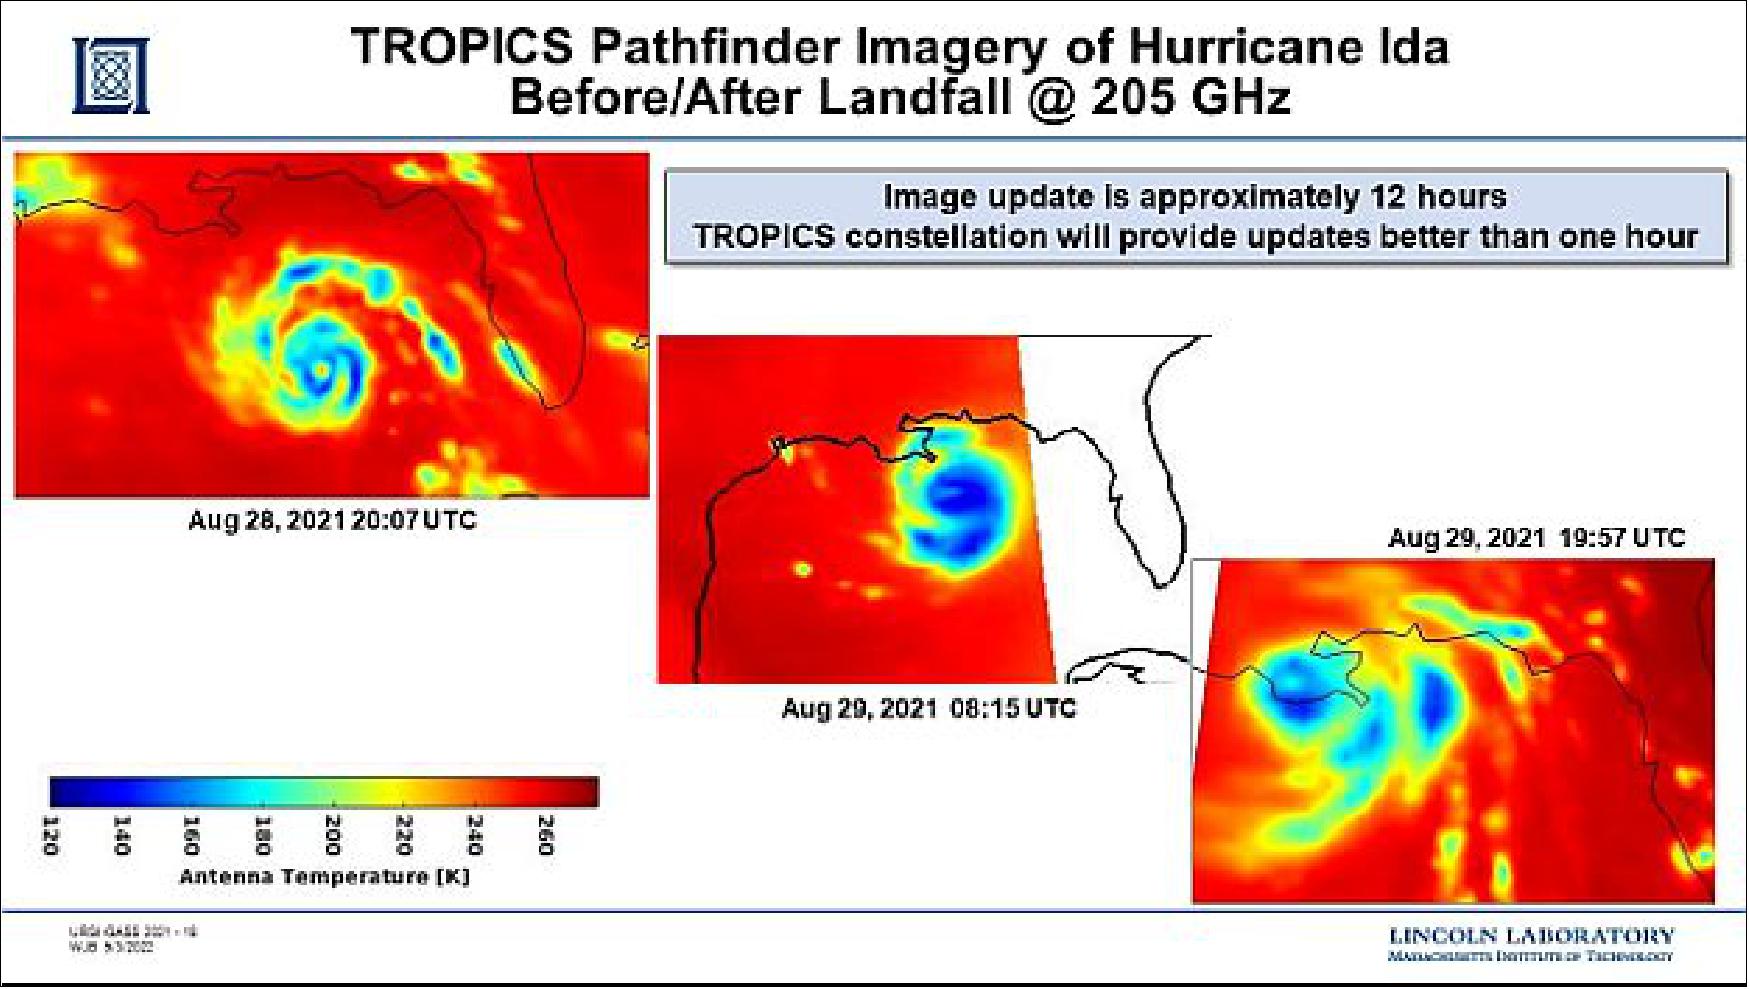 Figure 9: Images of Hurricane Ida before landfall (left) show a well-defined eye of the storm, as well as inner and outer rainbands that persisted as the storm made landfall in Louisiana (right), image credits: NASA / TROPICS Pathfinder satellite